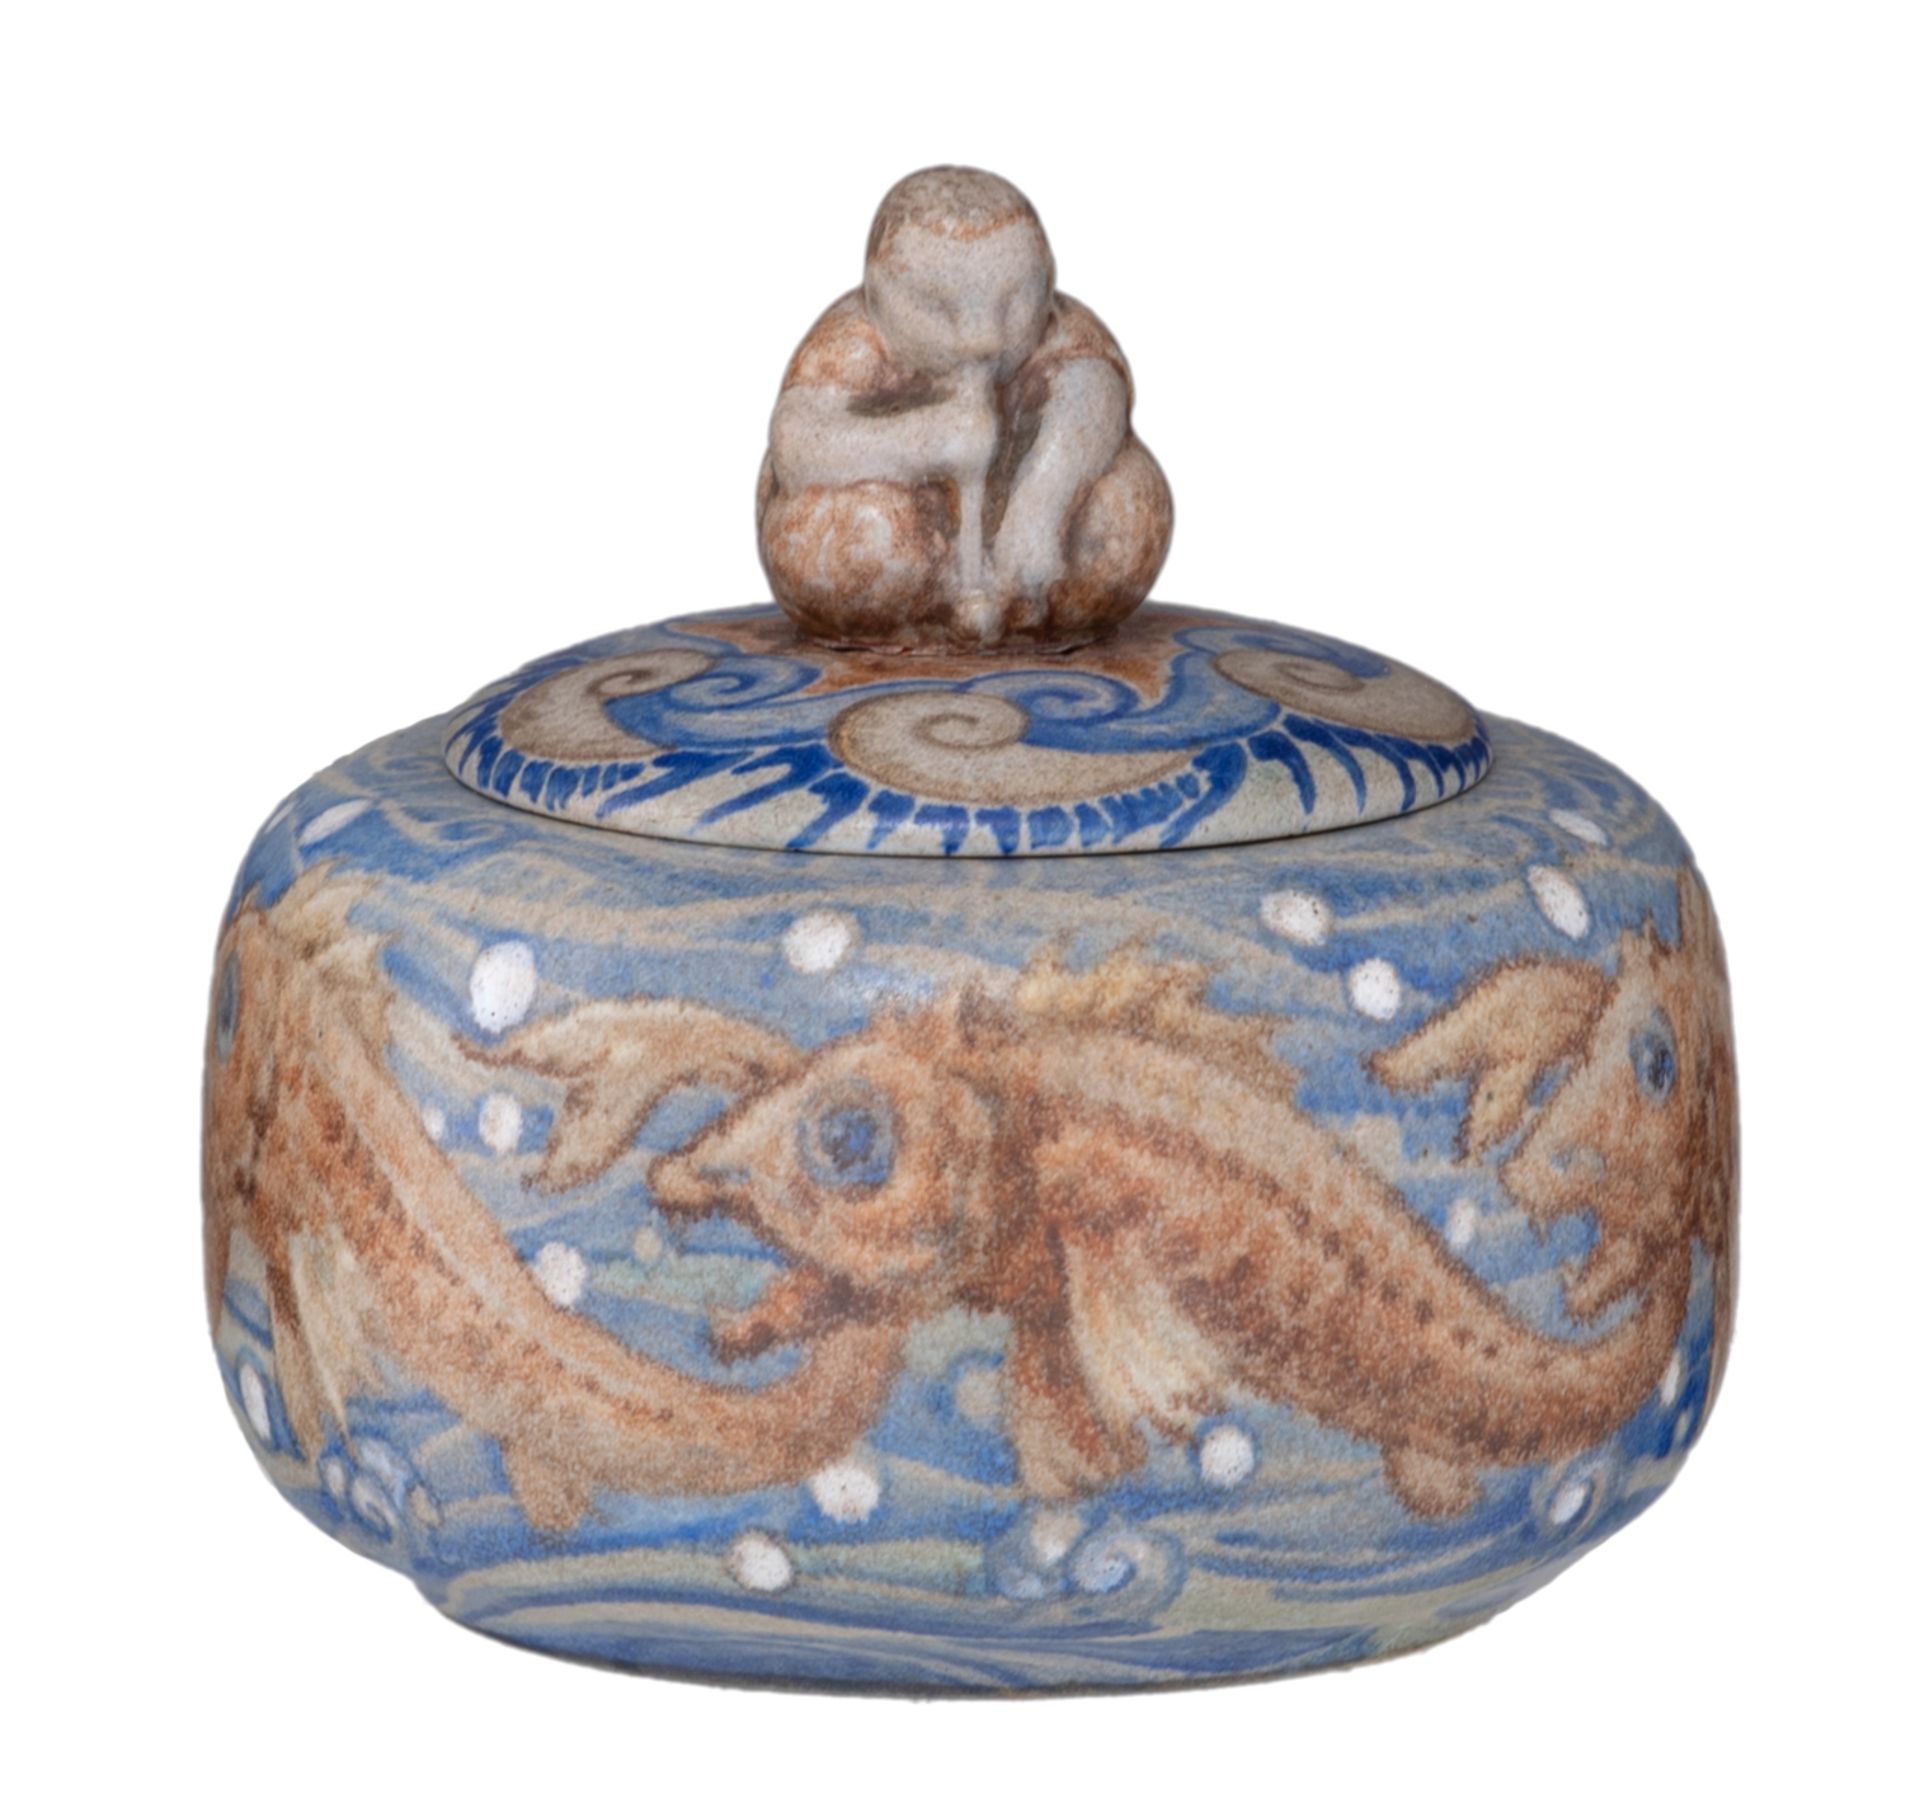 A Japanese inspired ceramic covered bowl, decorated with koi and on top a sitting figure, signed and